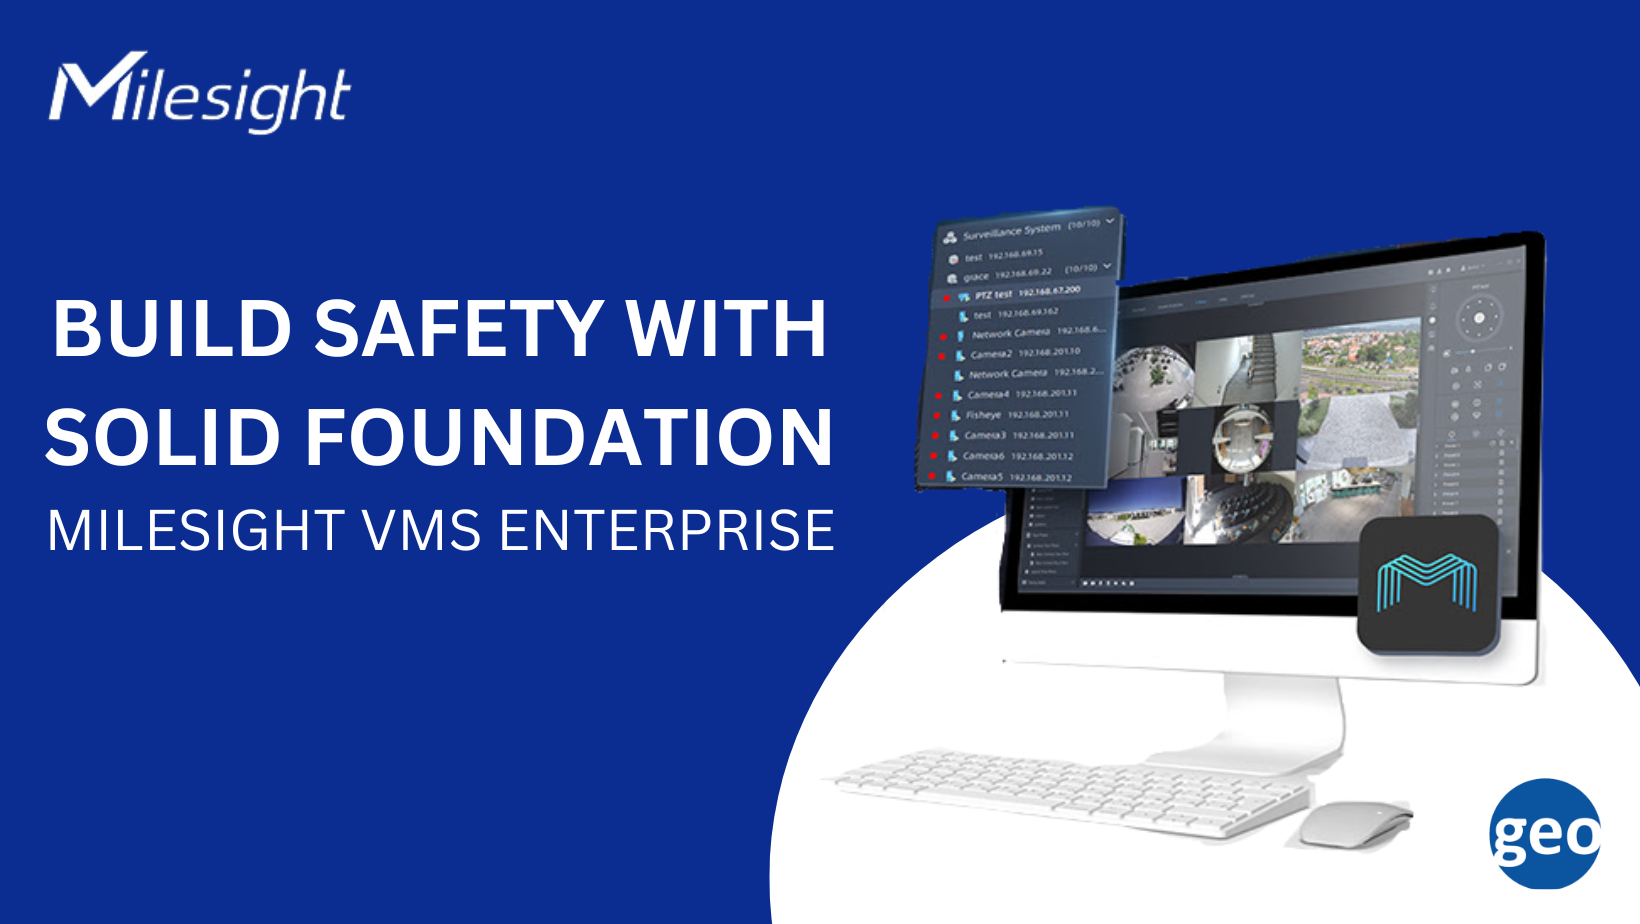 Milesight: VMS Enterprise to Build Safety with Solid Foundation